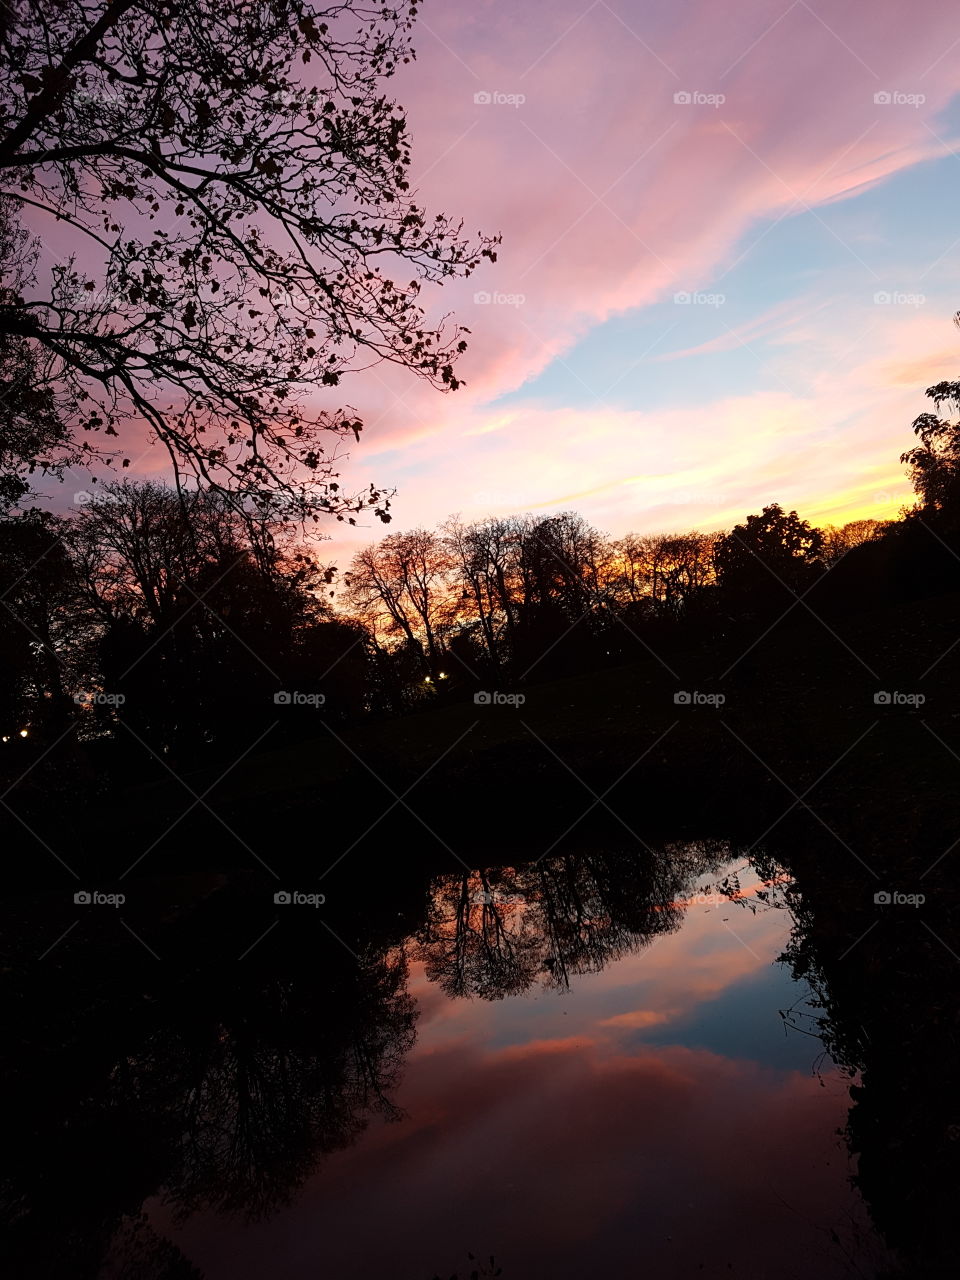 Captivating sunset, showing pink fluffy clouds against a bright blue sky. Reflections in the water with shadows of the trees and shrubbery around. Stunning image showing the beauty of nature.